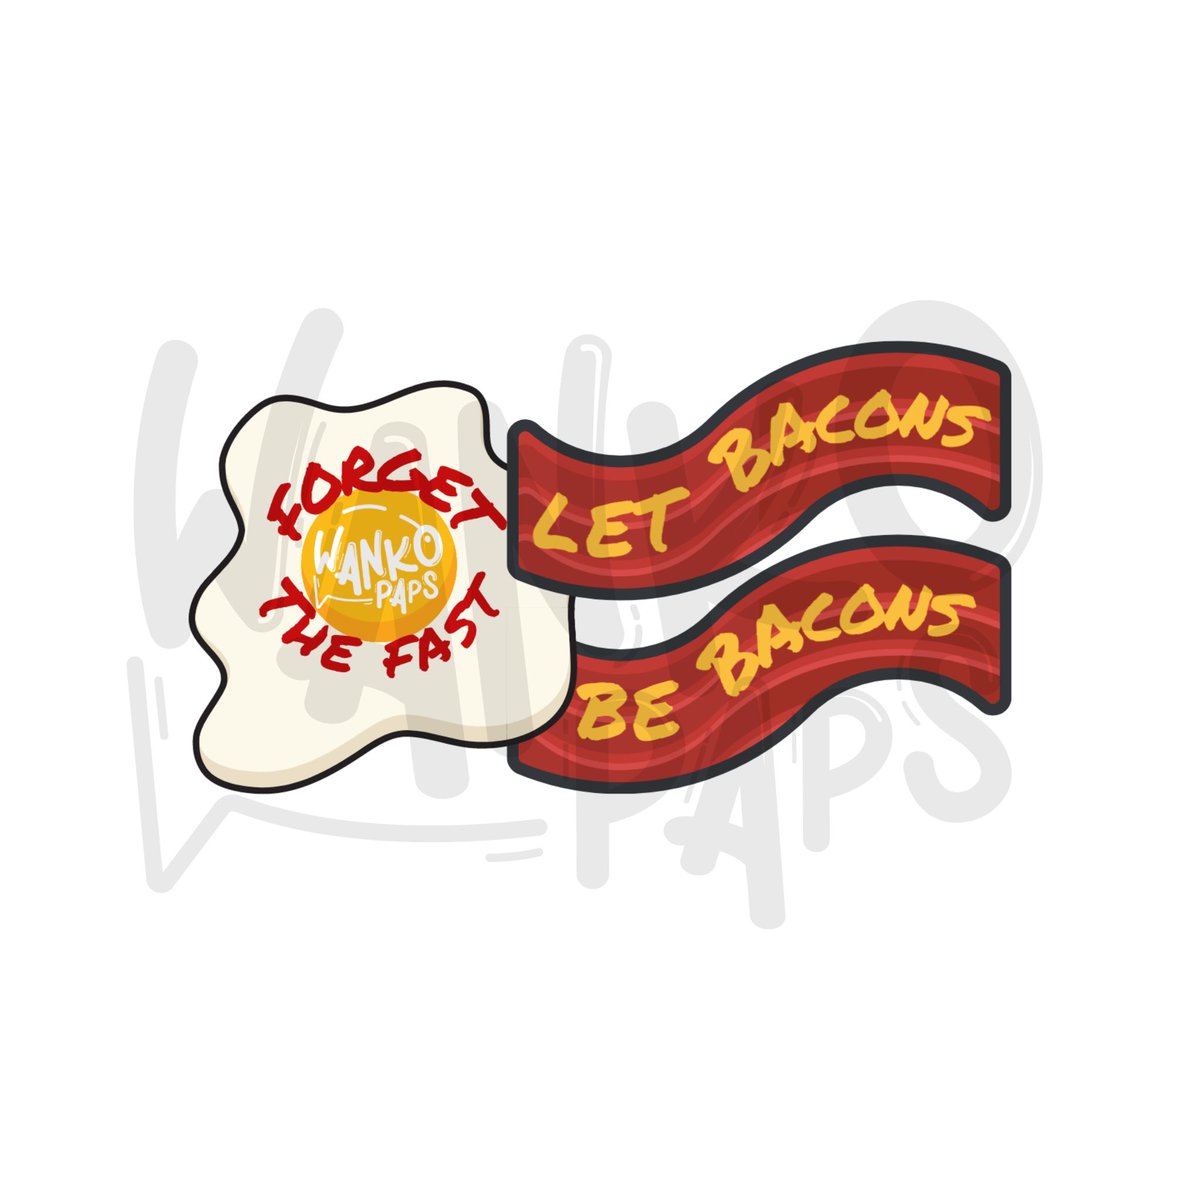 Let what happened in the fast, stay in the fast. Dig in to that bacon today 🥓. 

#letbygonesbebygones #bacon #breakfast #fasting #baconandegg #wankopaps